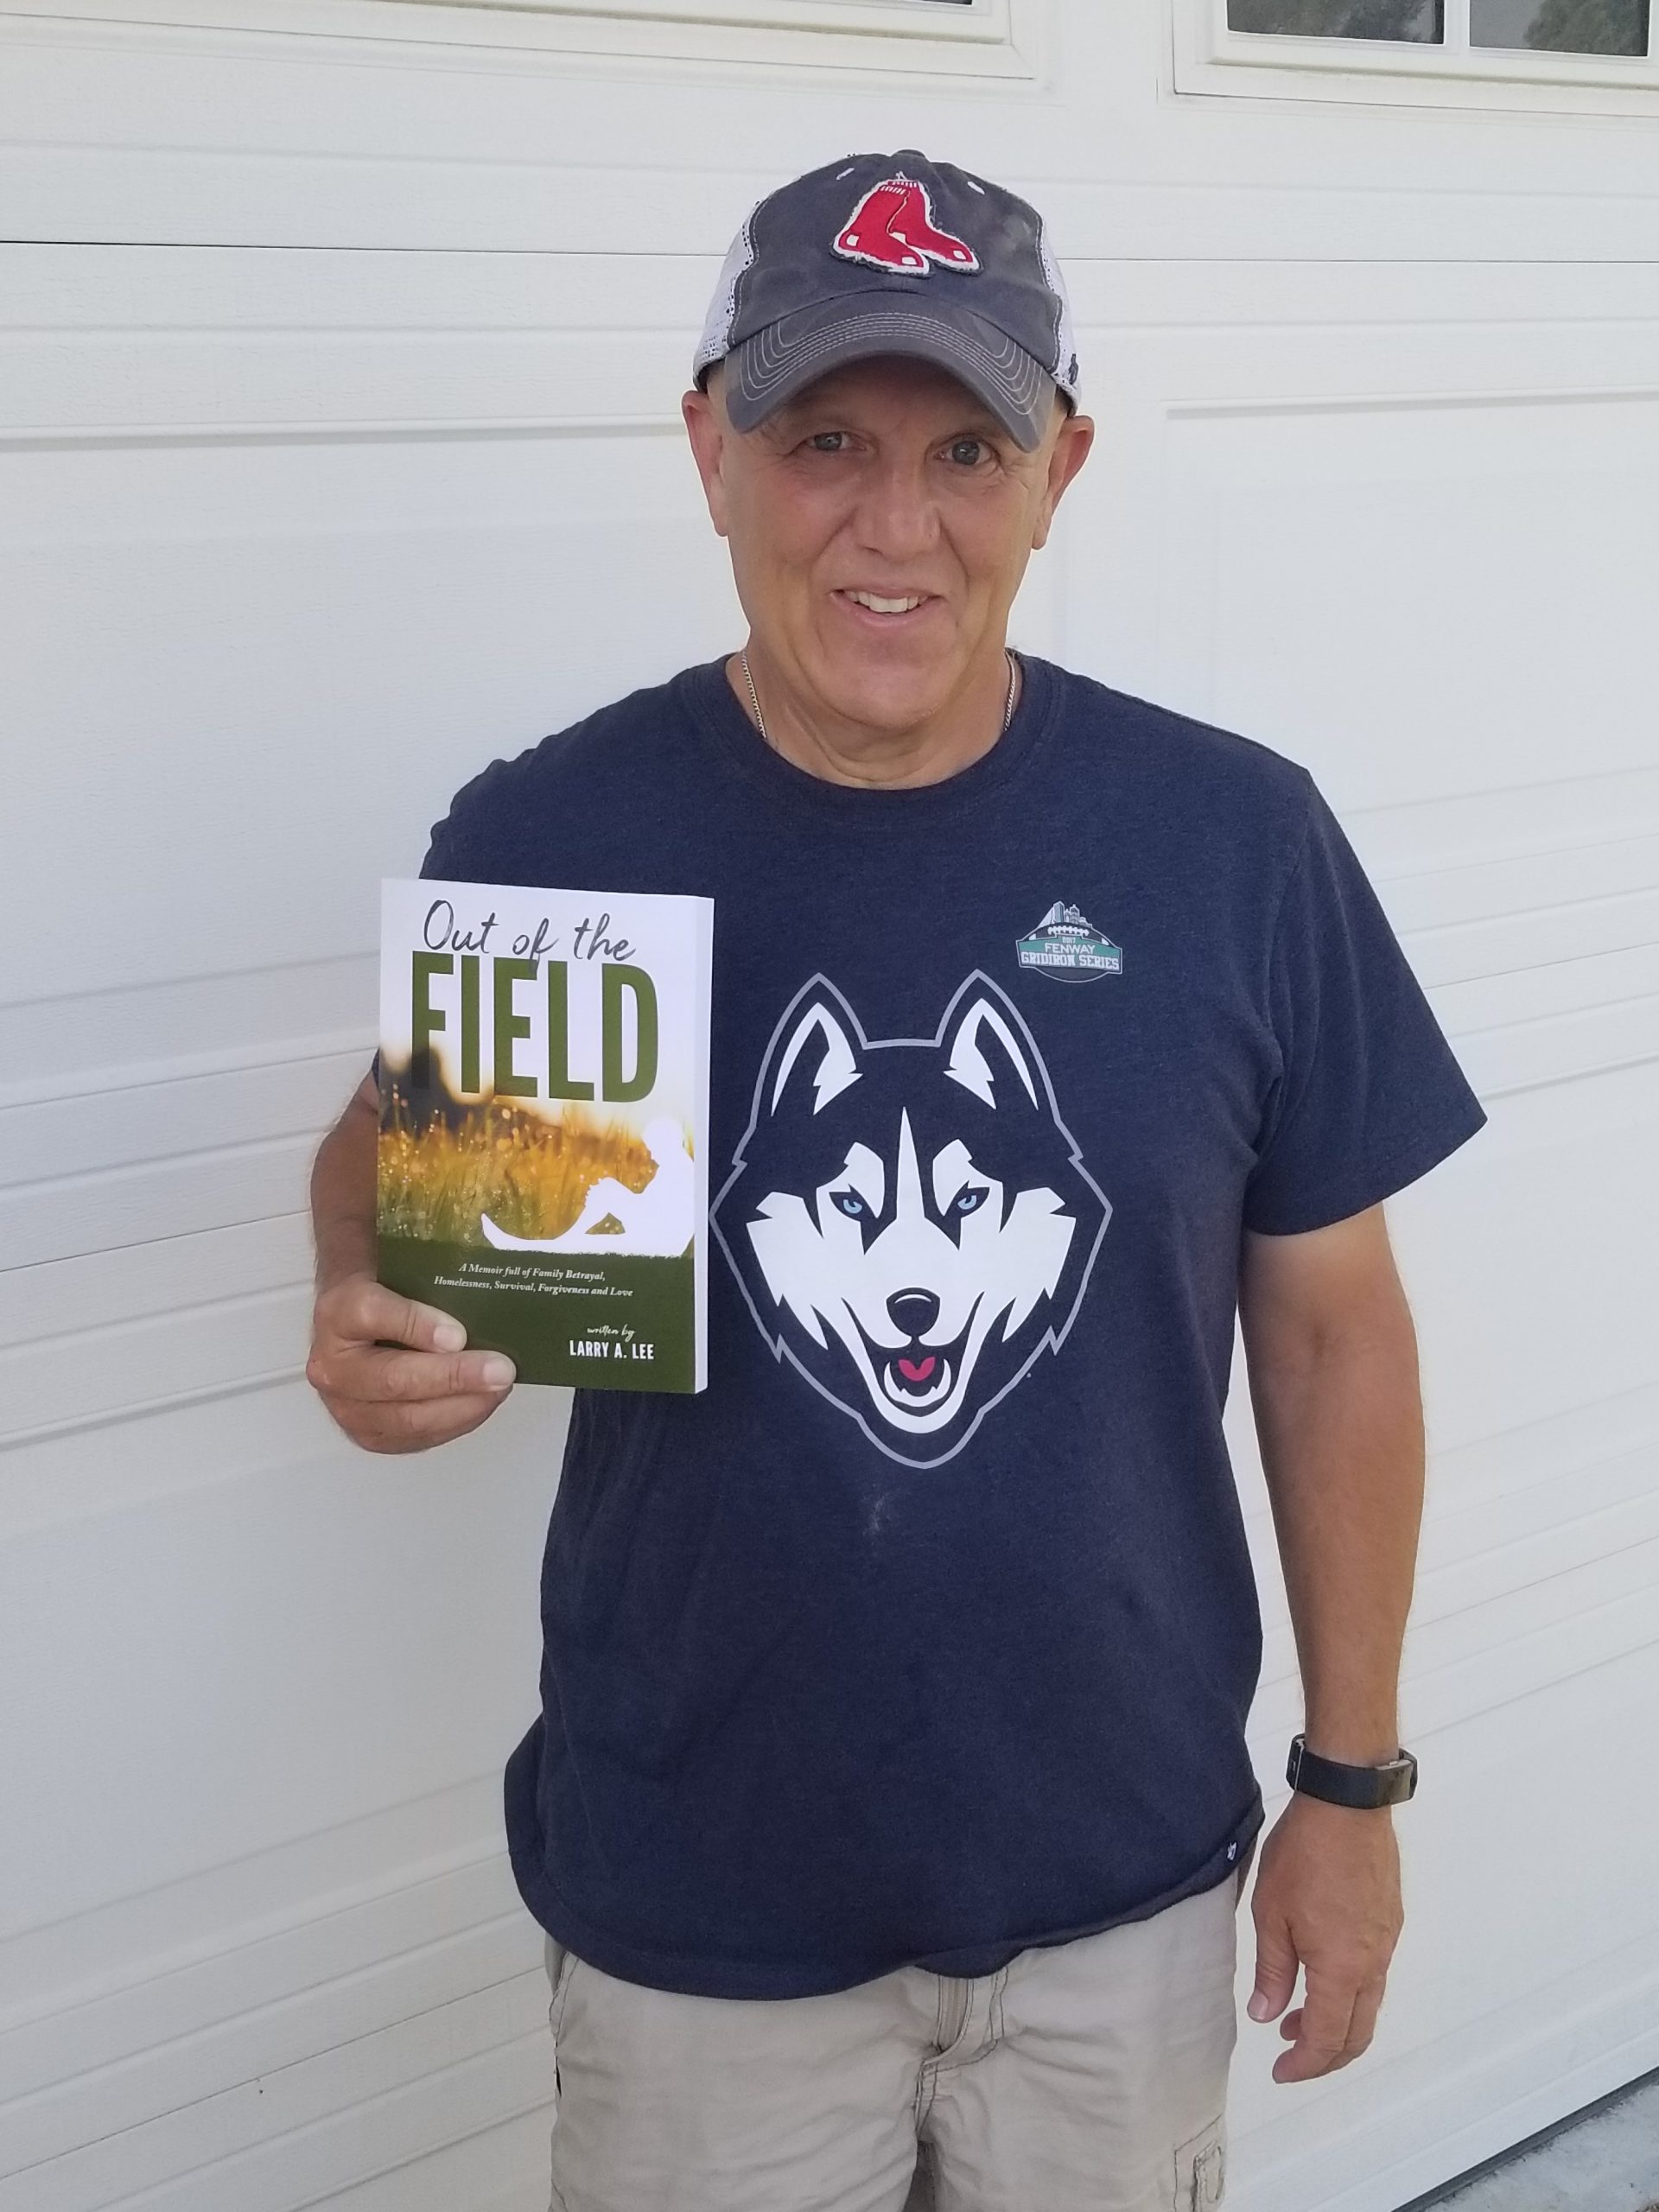 Out of the Field A Memoir full of Family Betrayal, Homelessness, Survival, Forgiveness and Love by Larry A. Lee (1)